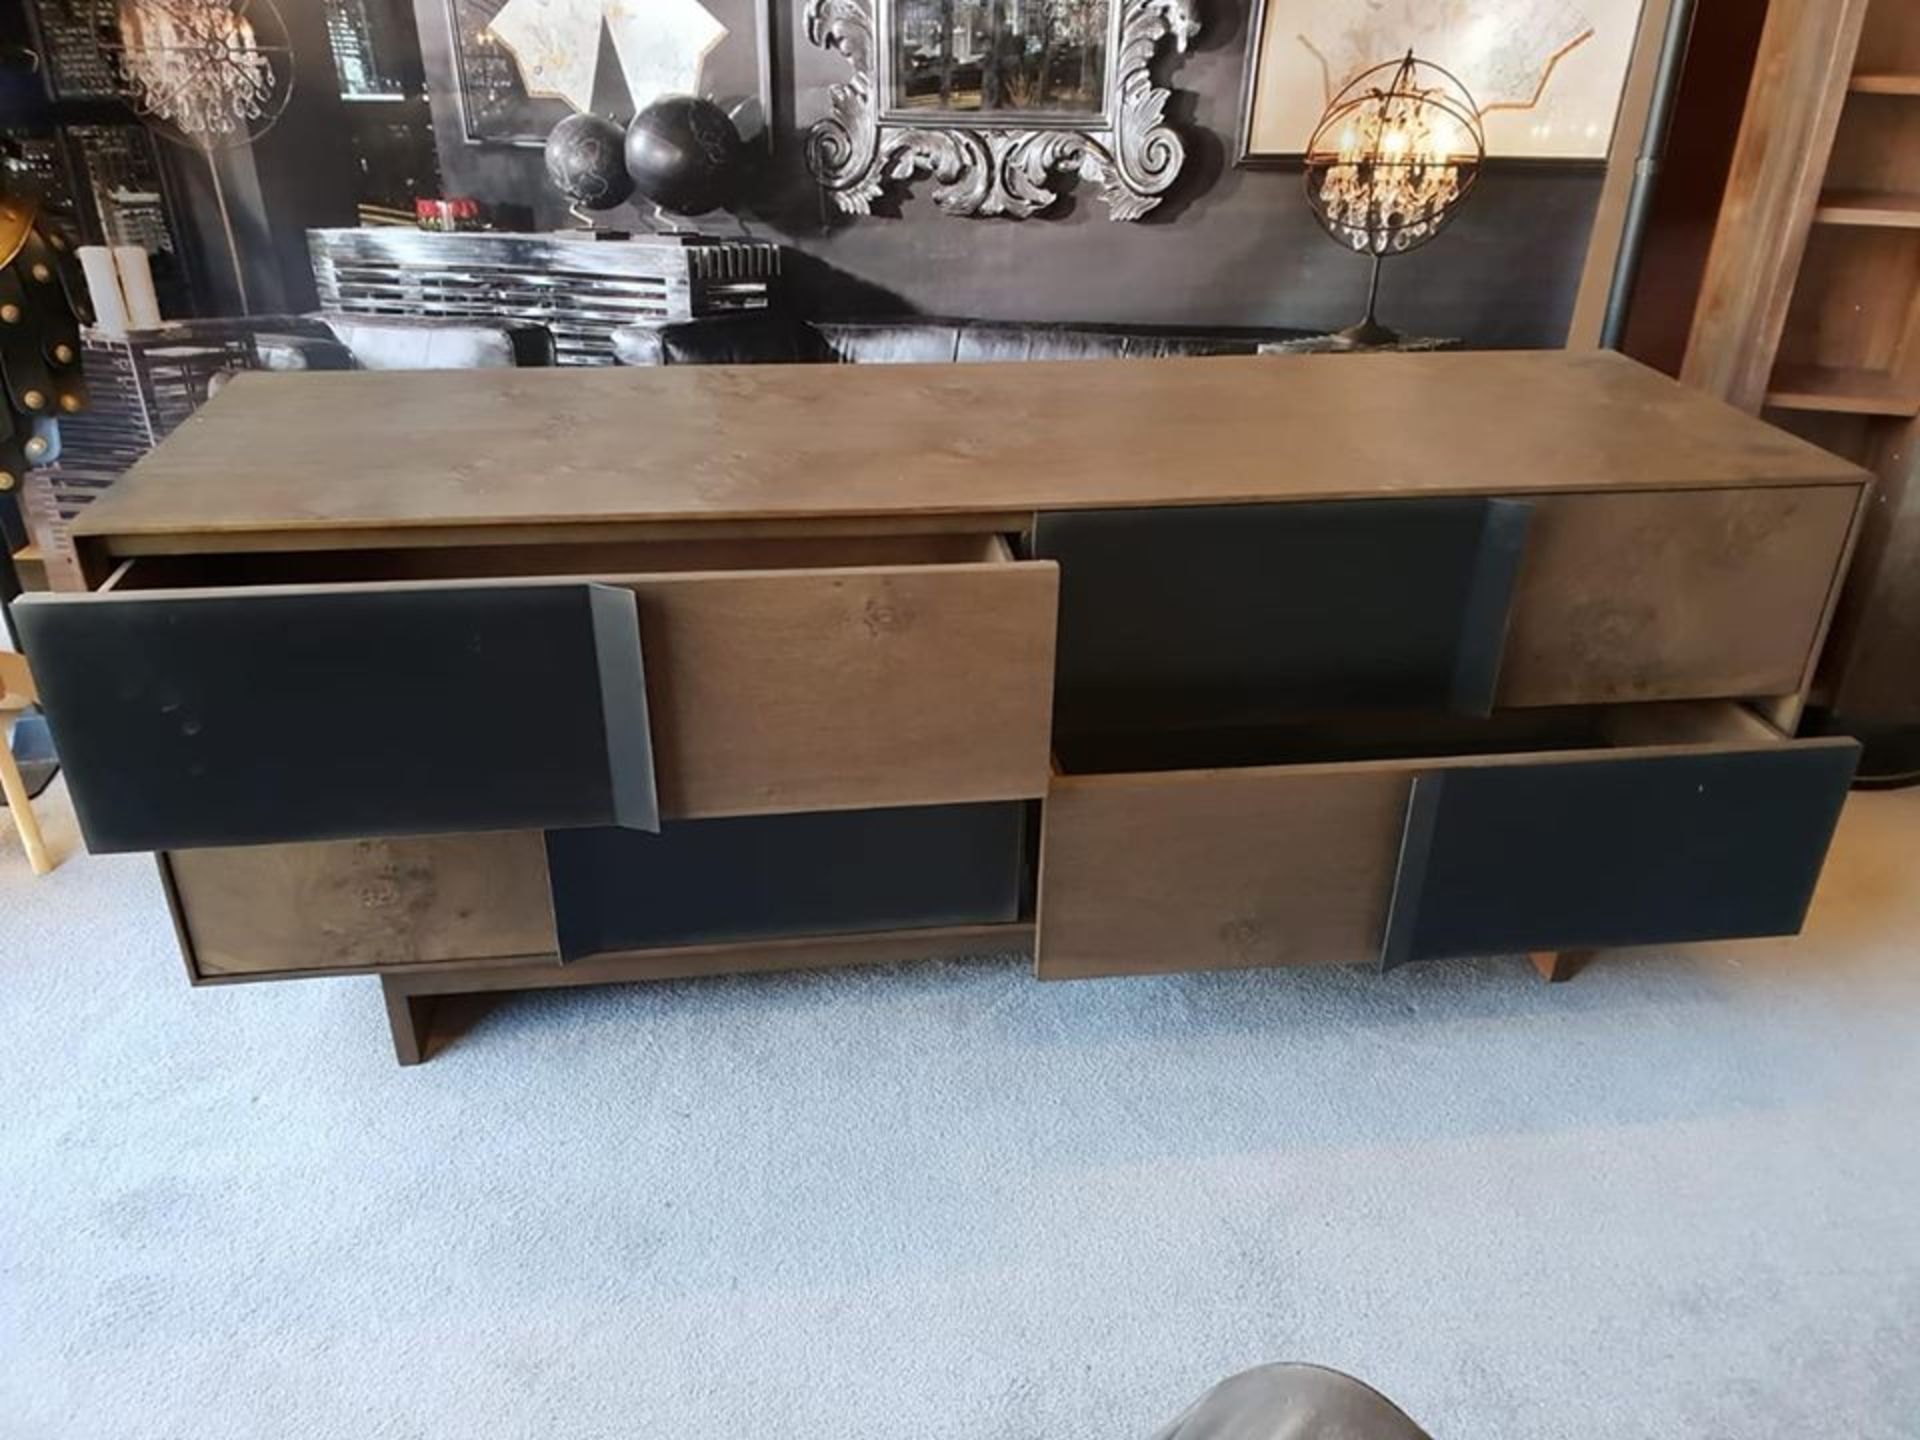 Josephine Credenza Sideboard 4 Drawer Closed A Stunning Contemporary Sideboard In Reclaimed Peroba - Image 2 of 3